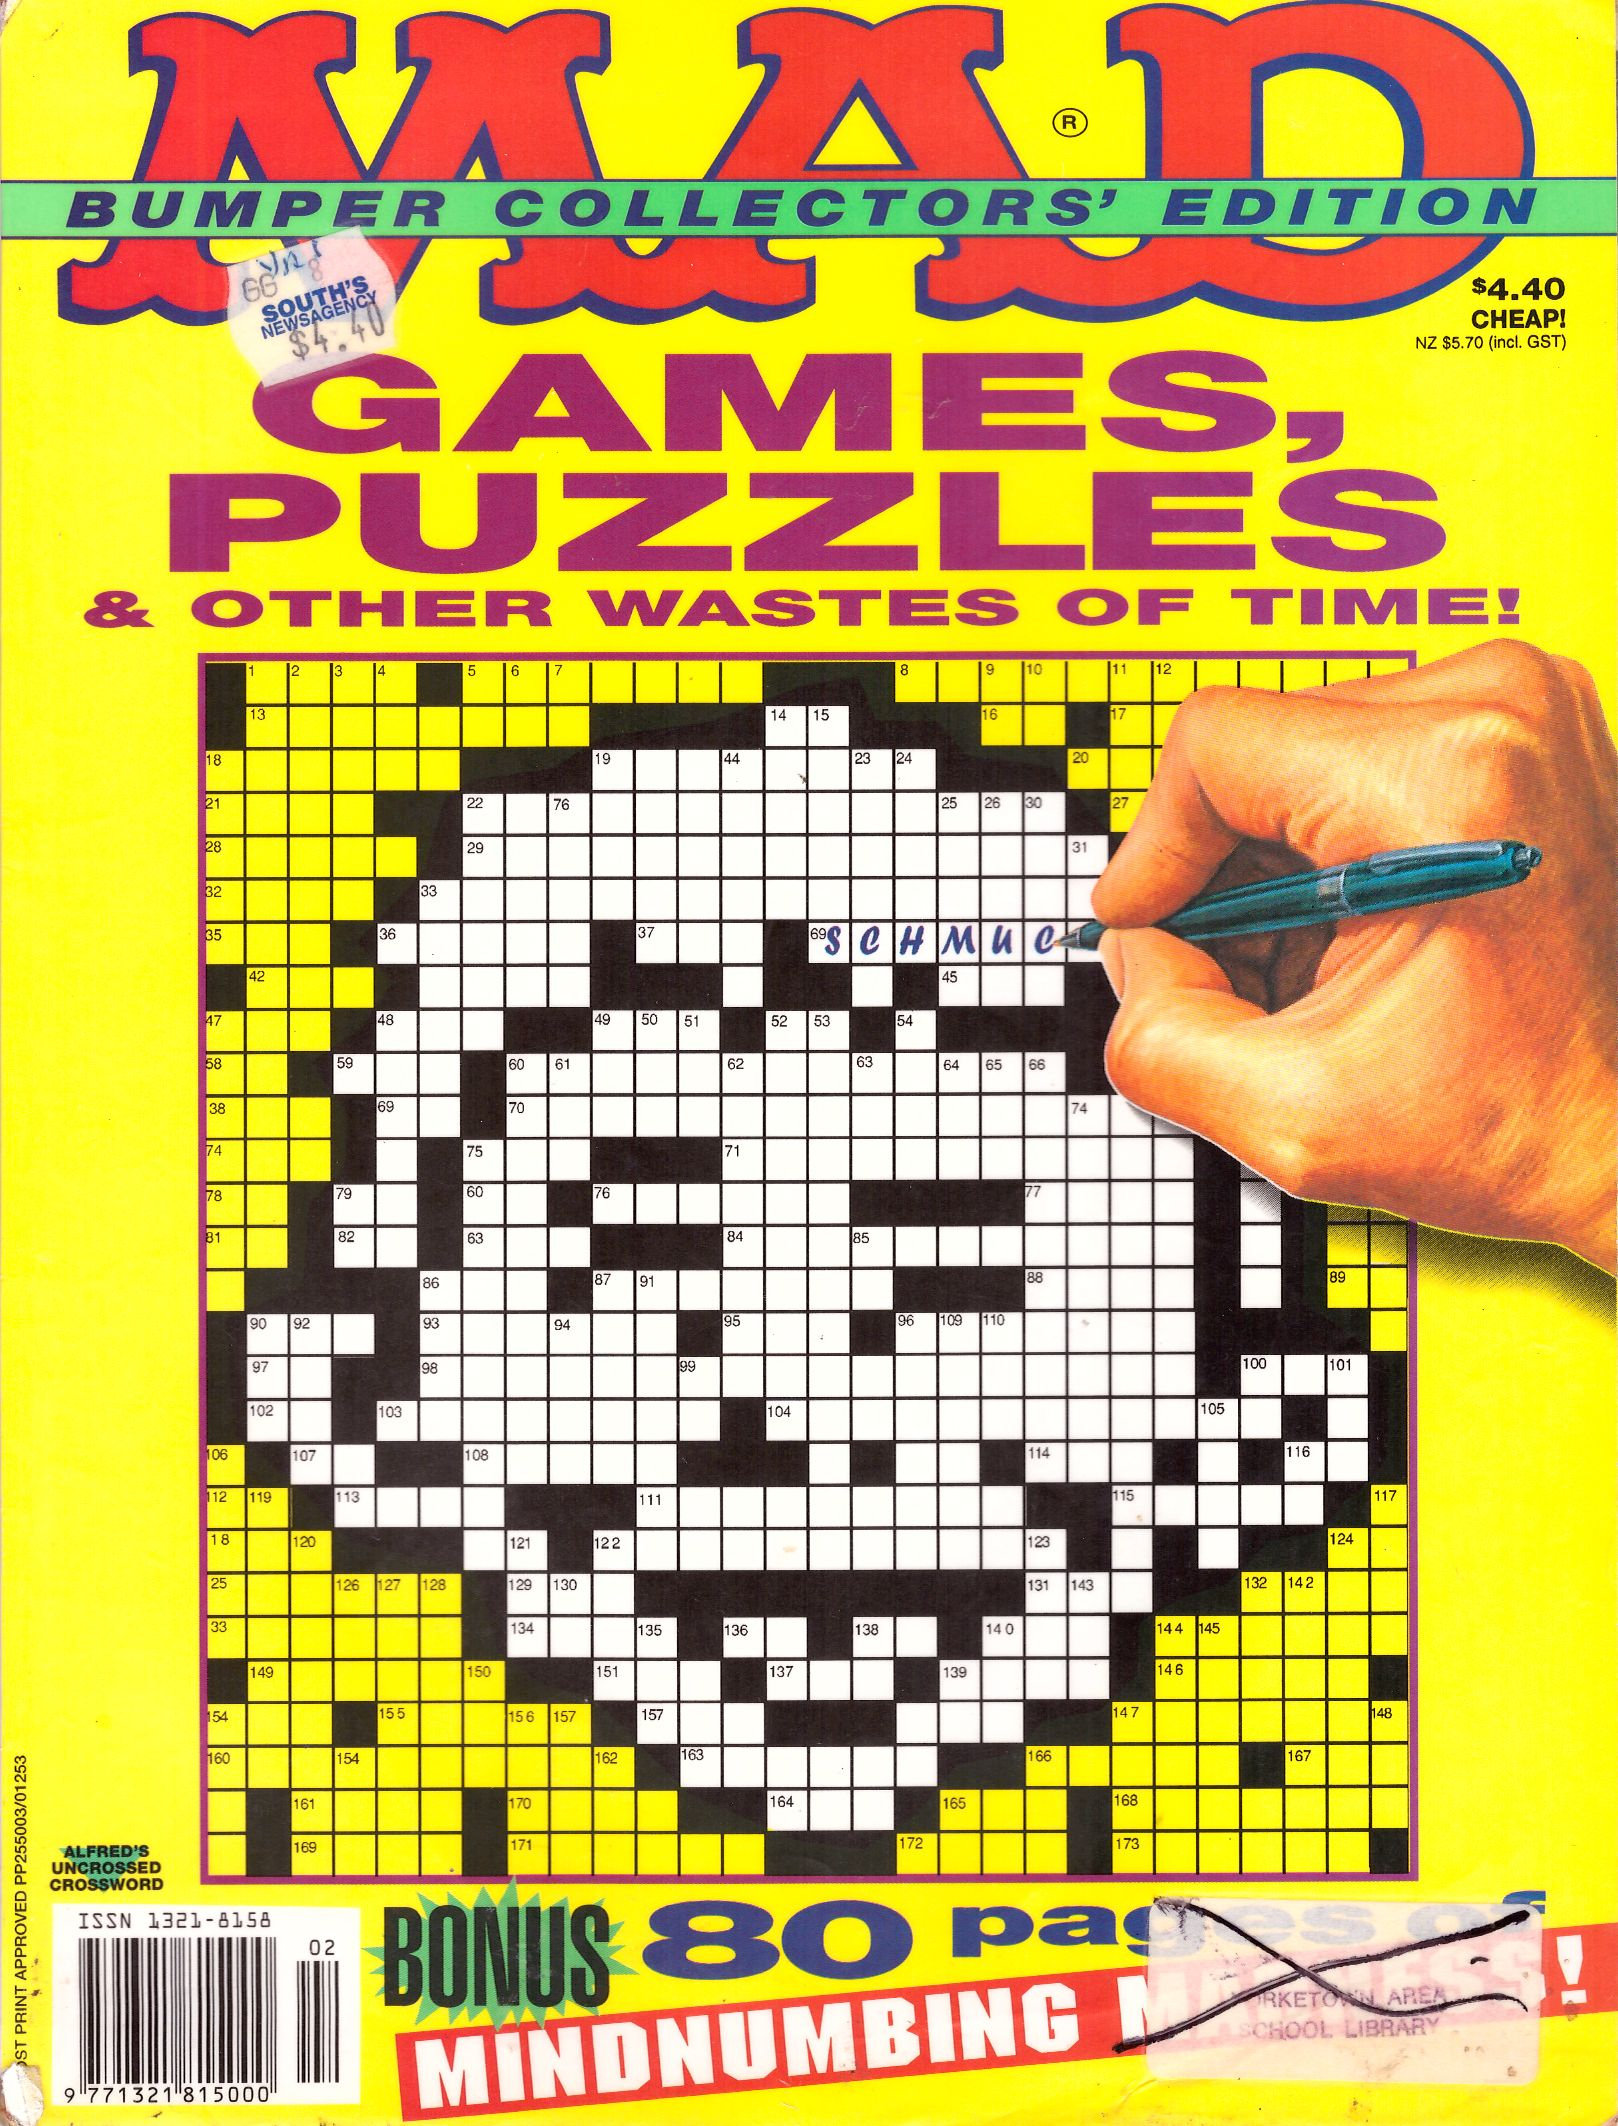 MAD Bumpers Collectors Edition: Games, Puzzles & other wastes of time • Australia